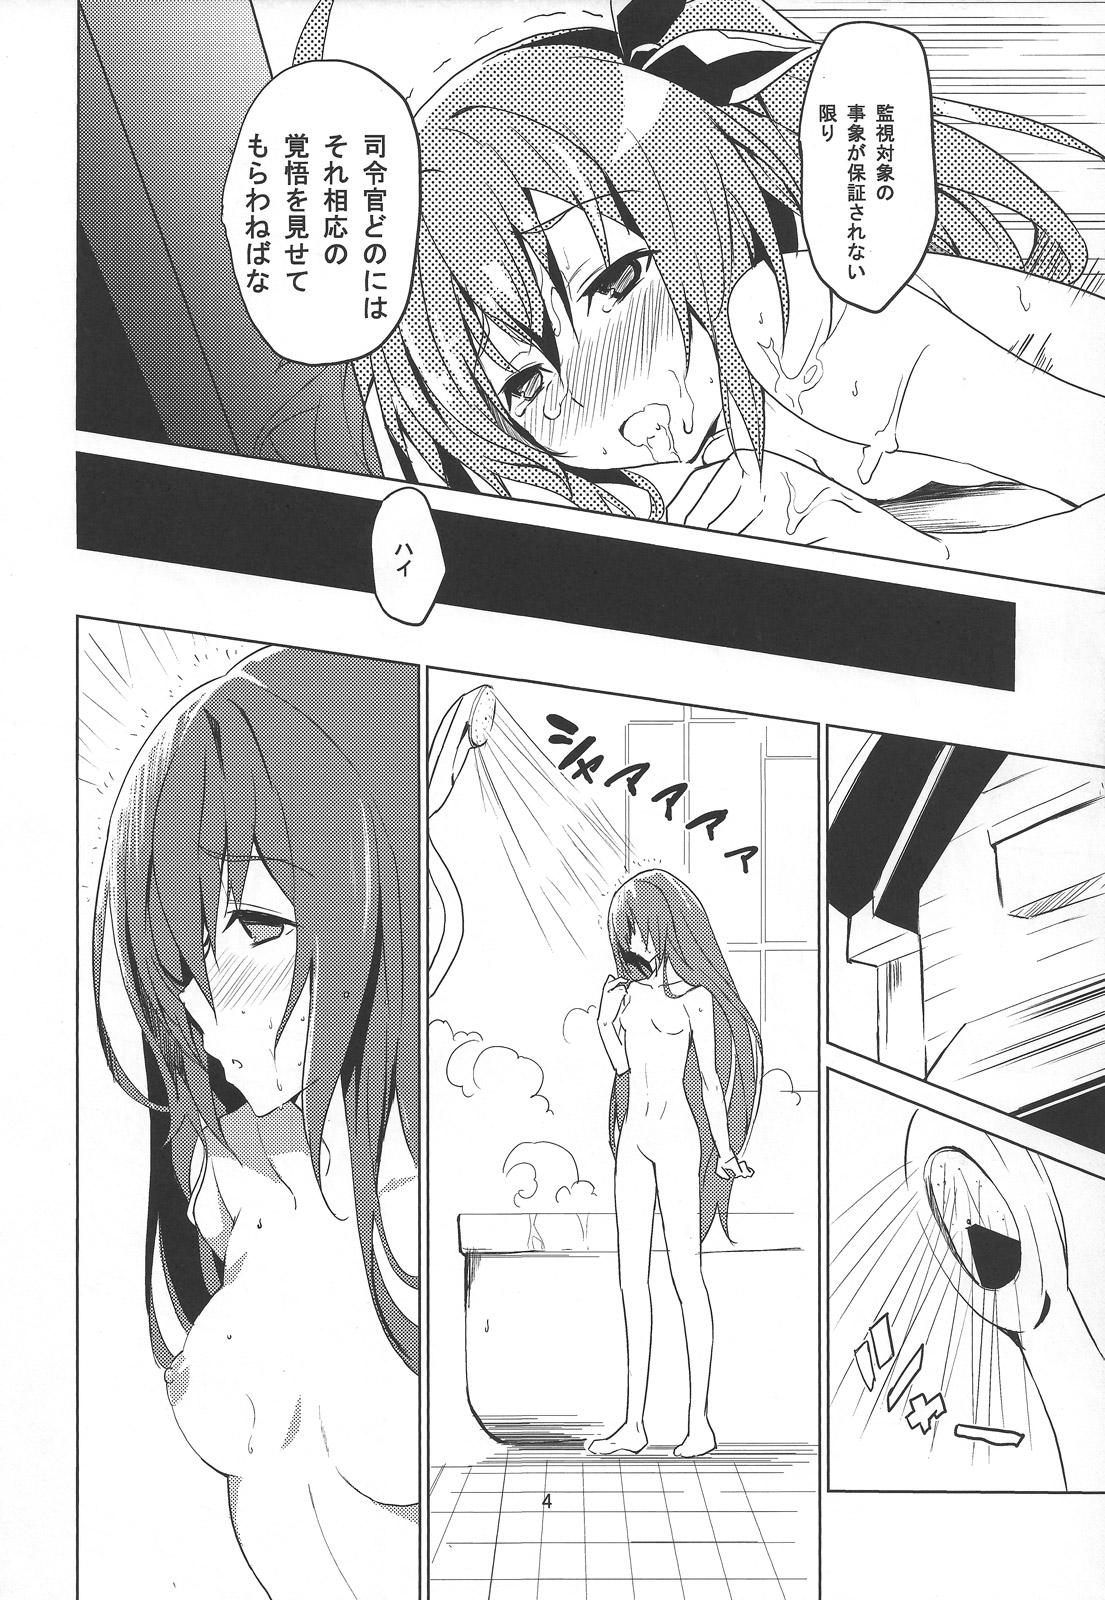 Pink hollie - Date a live Dick Suck - Page 5